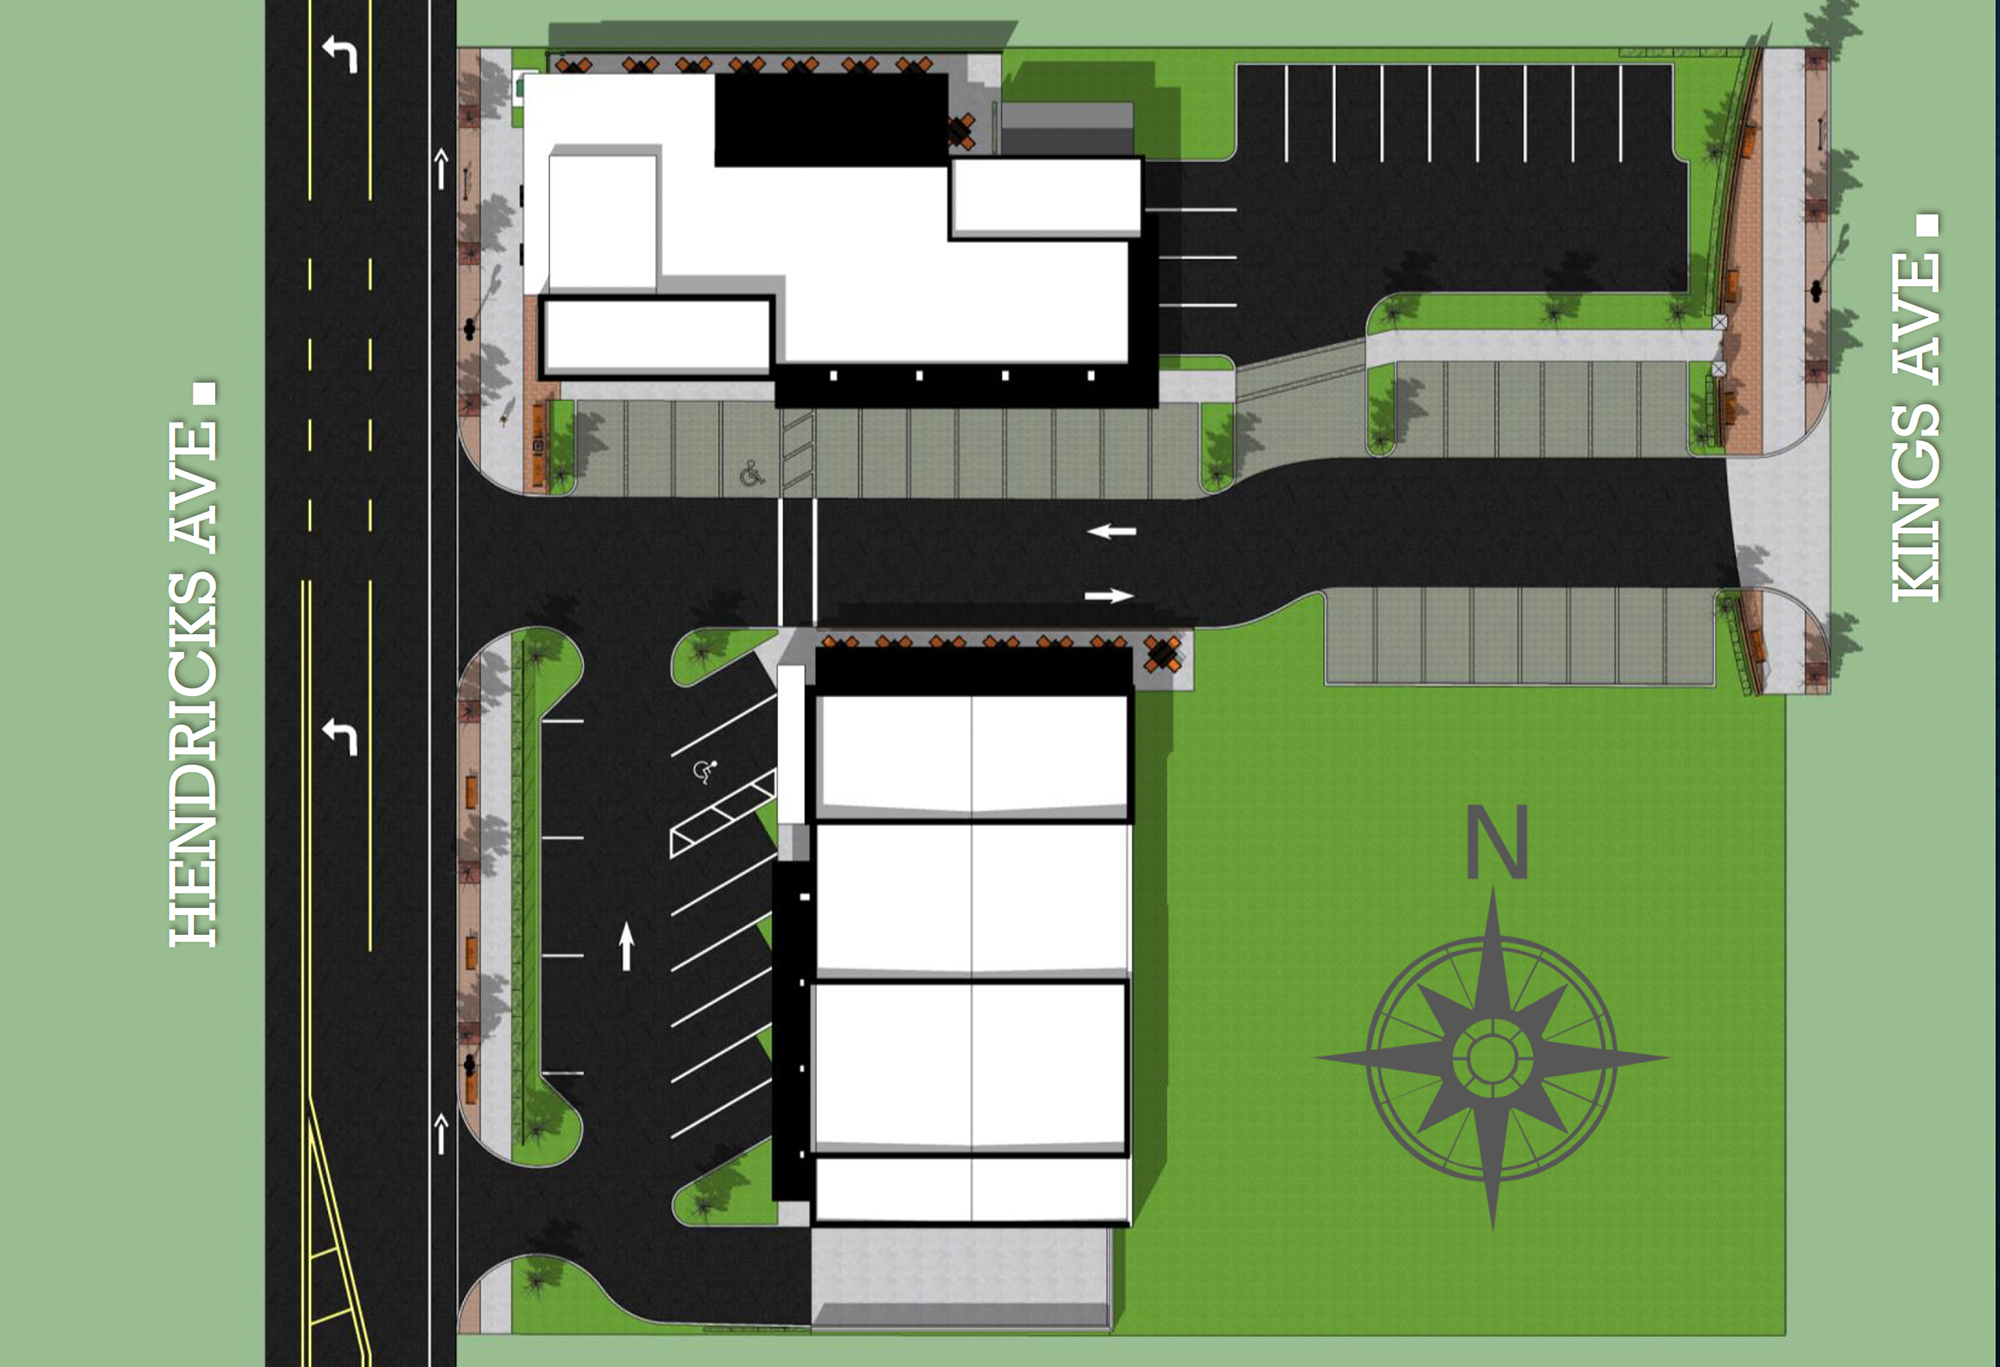 The plan for the Reddi-Arts site would create two restaurant buildings with access from Hendricks and Kings avenues.